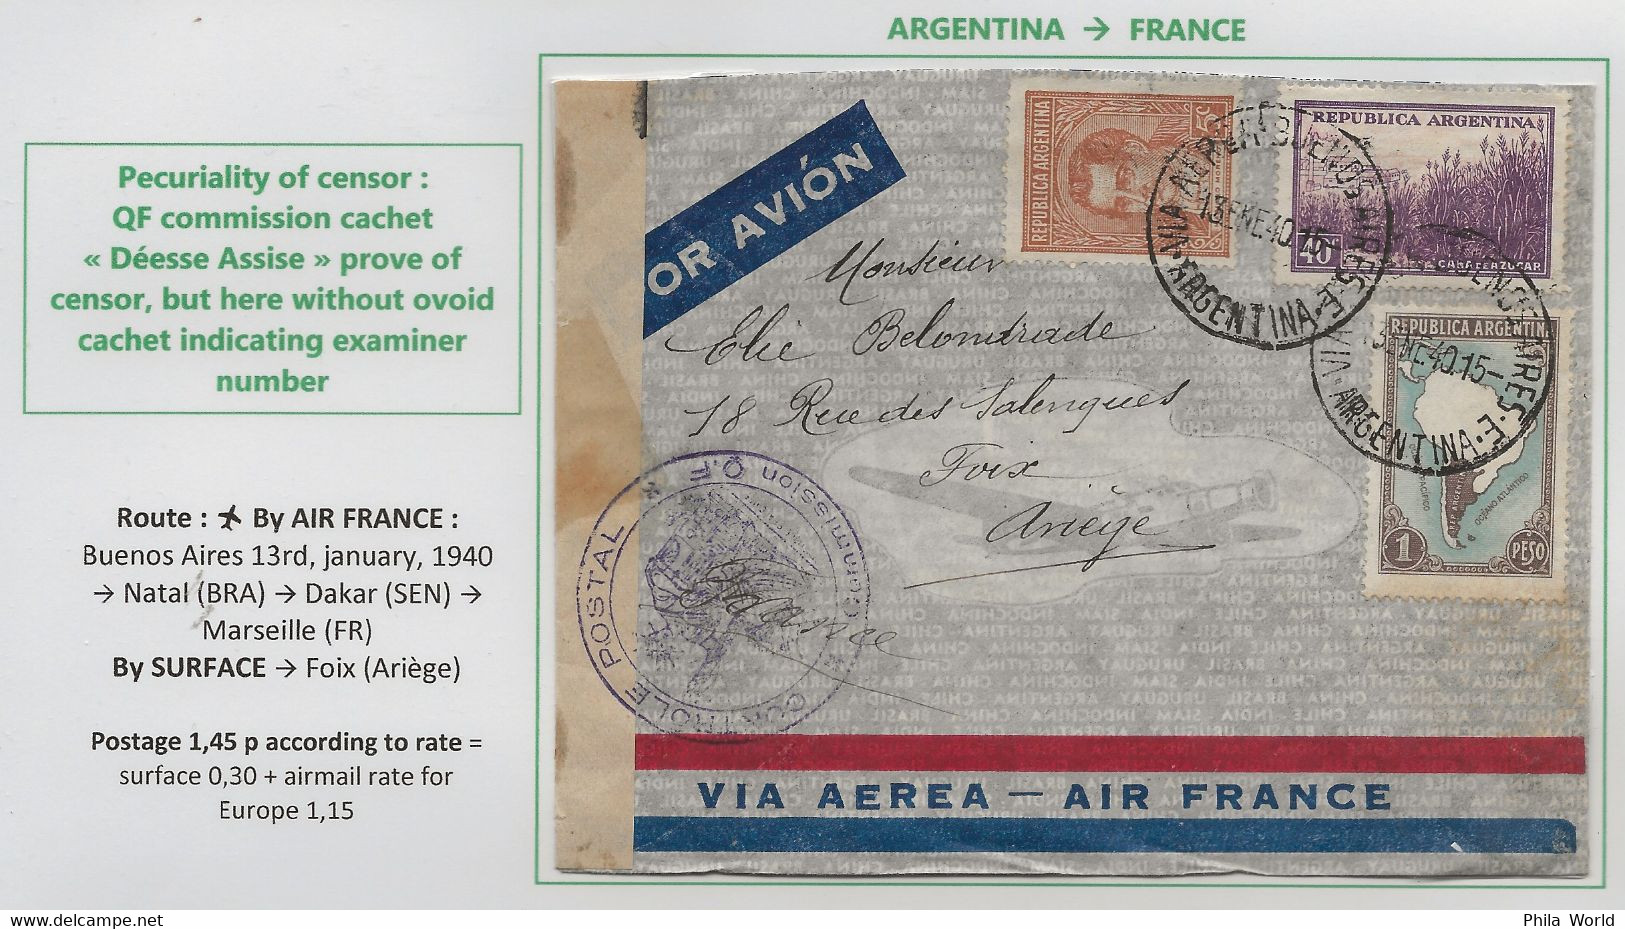 AIR FRANCE 1940 Argentina France Air Mail Cover QF Commission DEESSE ASSISE Without Ovoid Cachet Examiner Number - Storia Postale